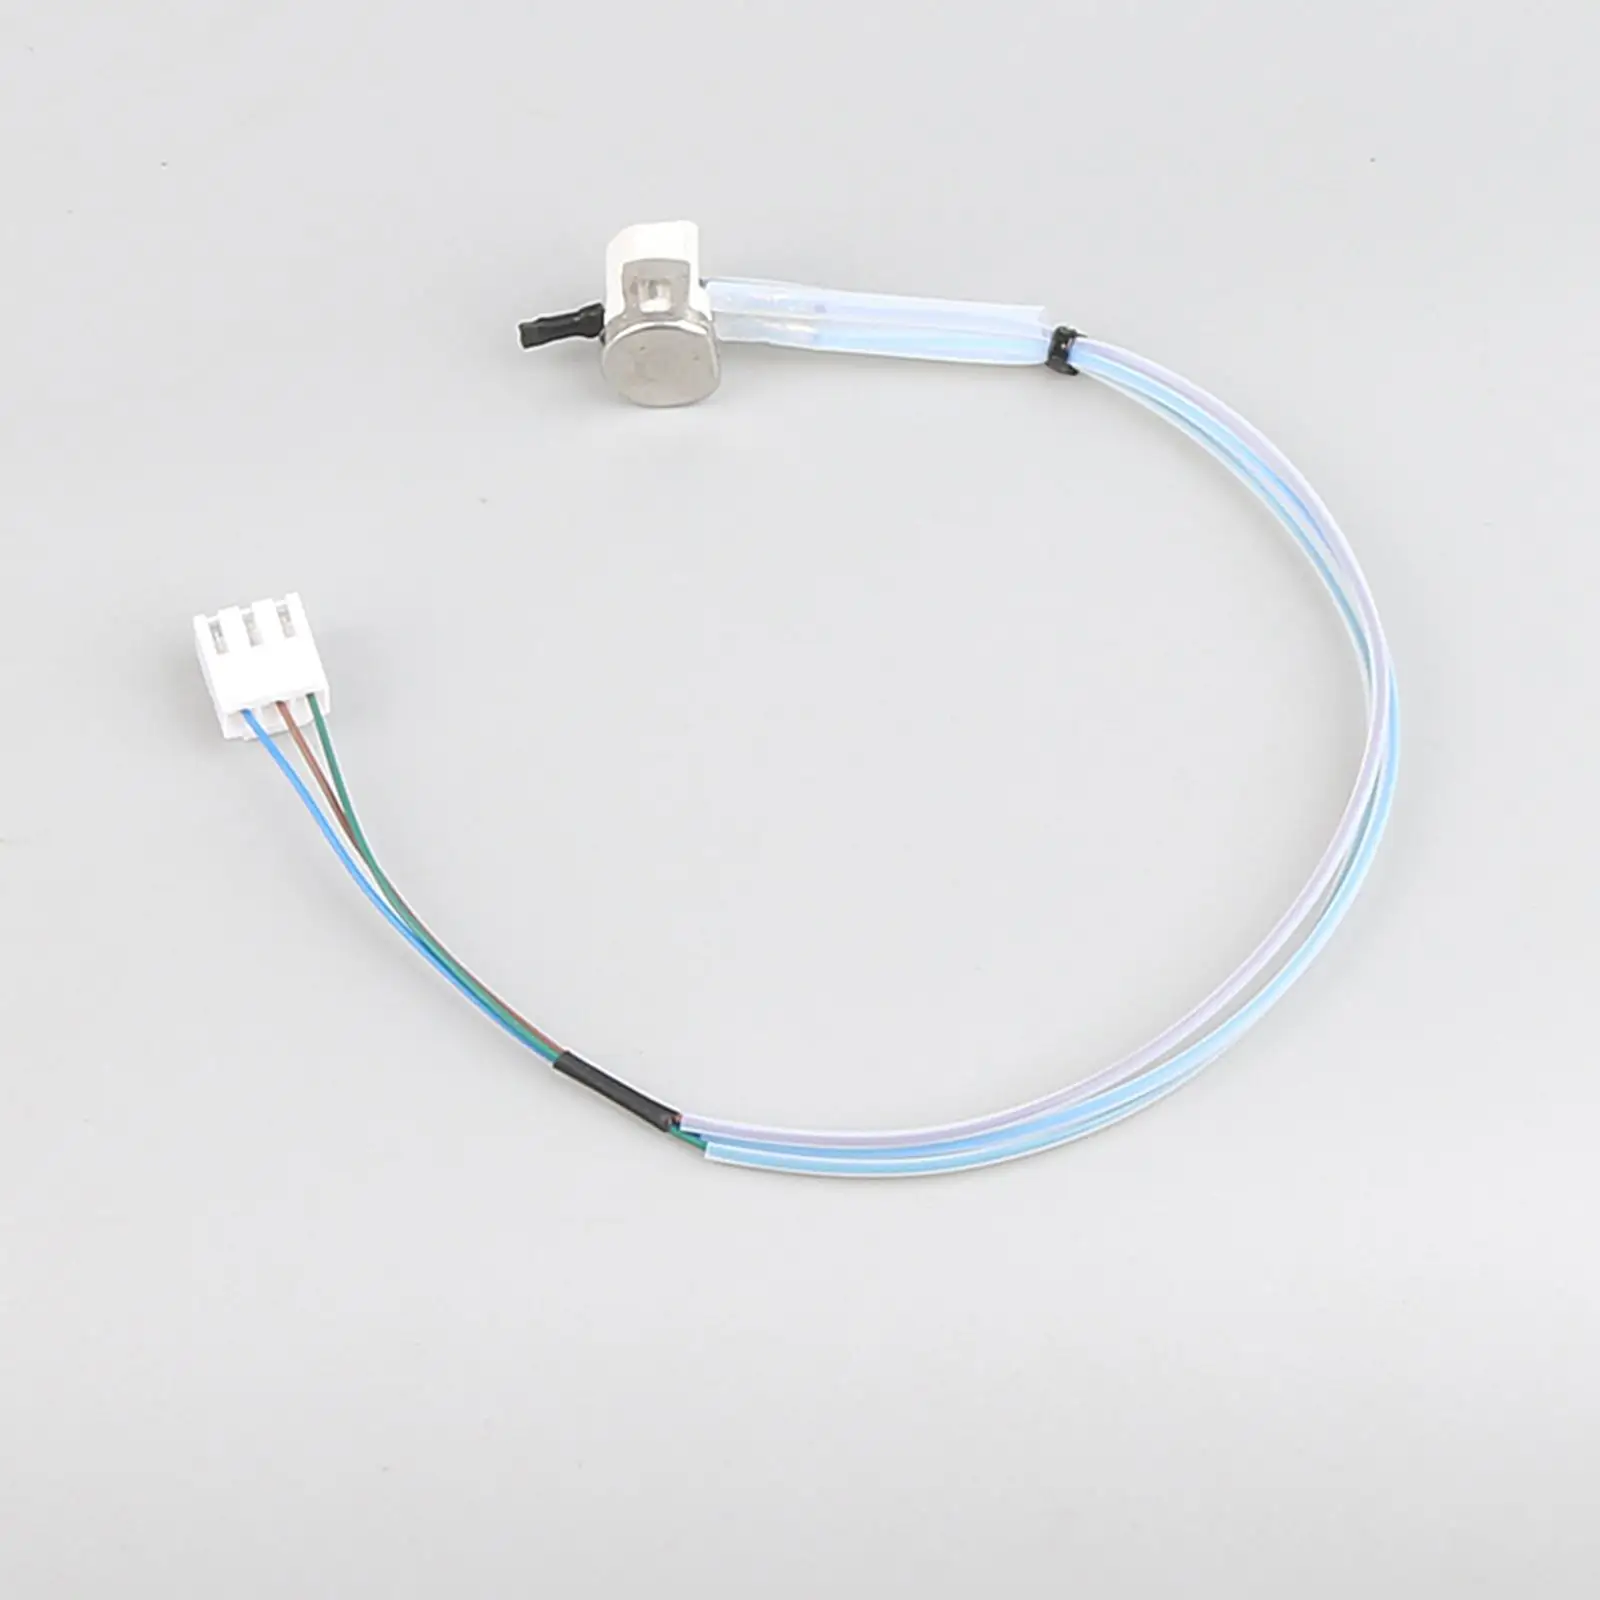 Replacement PT1000 Temperature Sensor 3 Wire Accessories Sturdy Directly Replace Square Connector for 2kW 5kW Diesel Heater